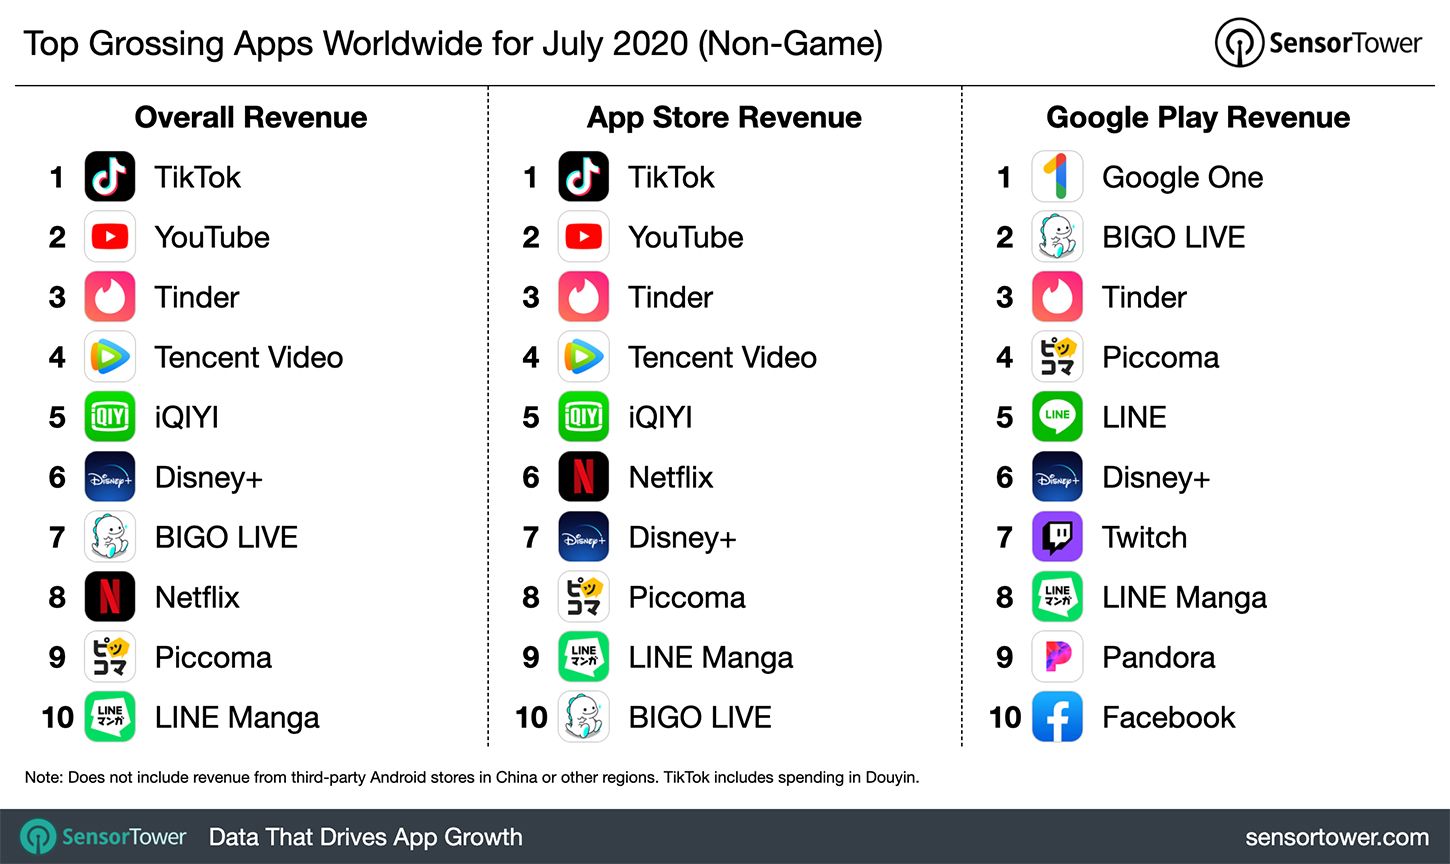 Top Grossing Apps Worldwide for July 2020